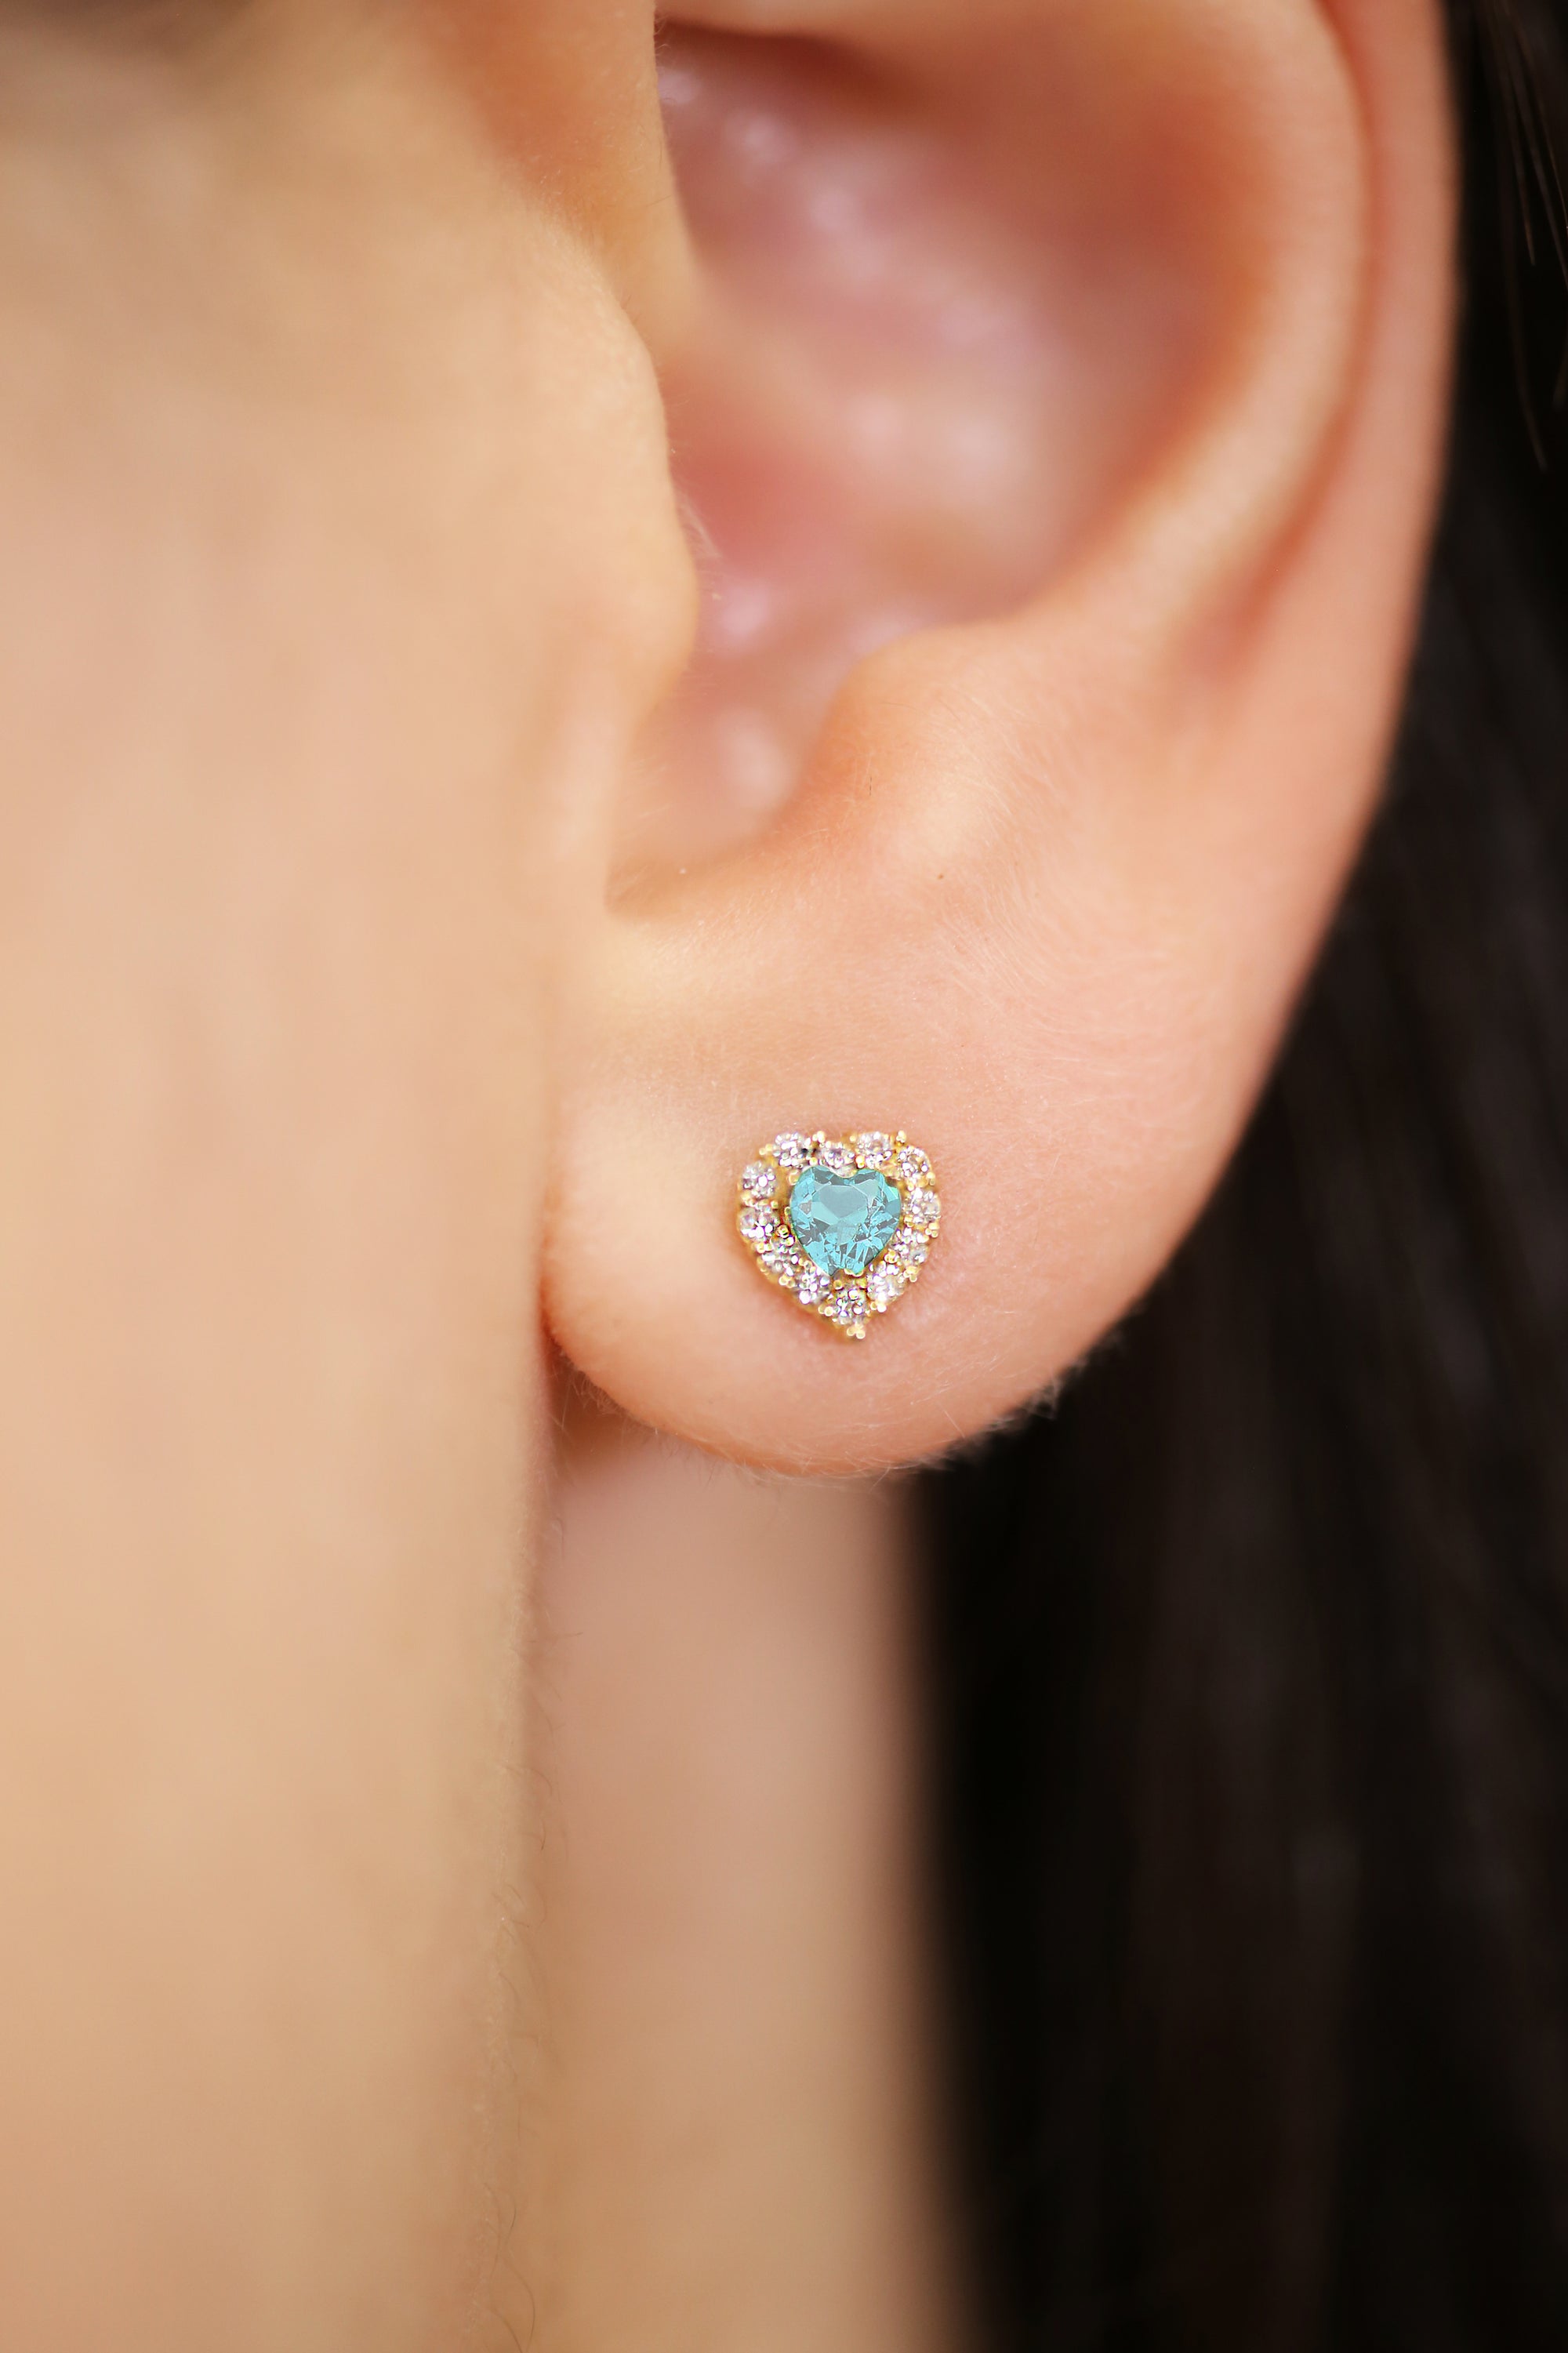 14k Yellow Gold Halo Heart Birthstone Stud Earrings, With Secure Screwbacks, Available in 12 Colors